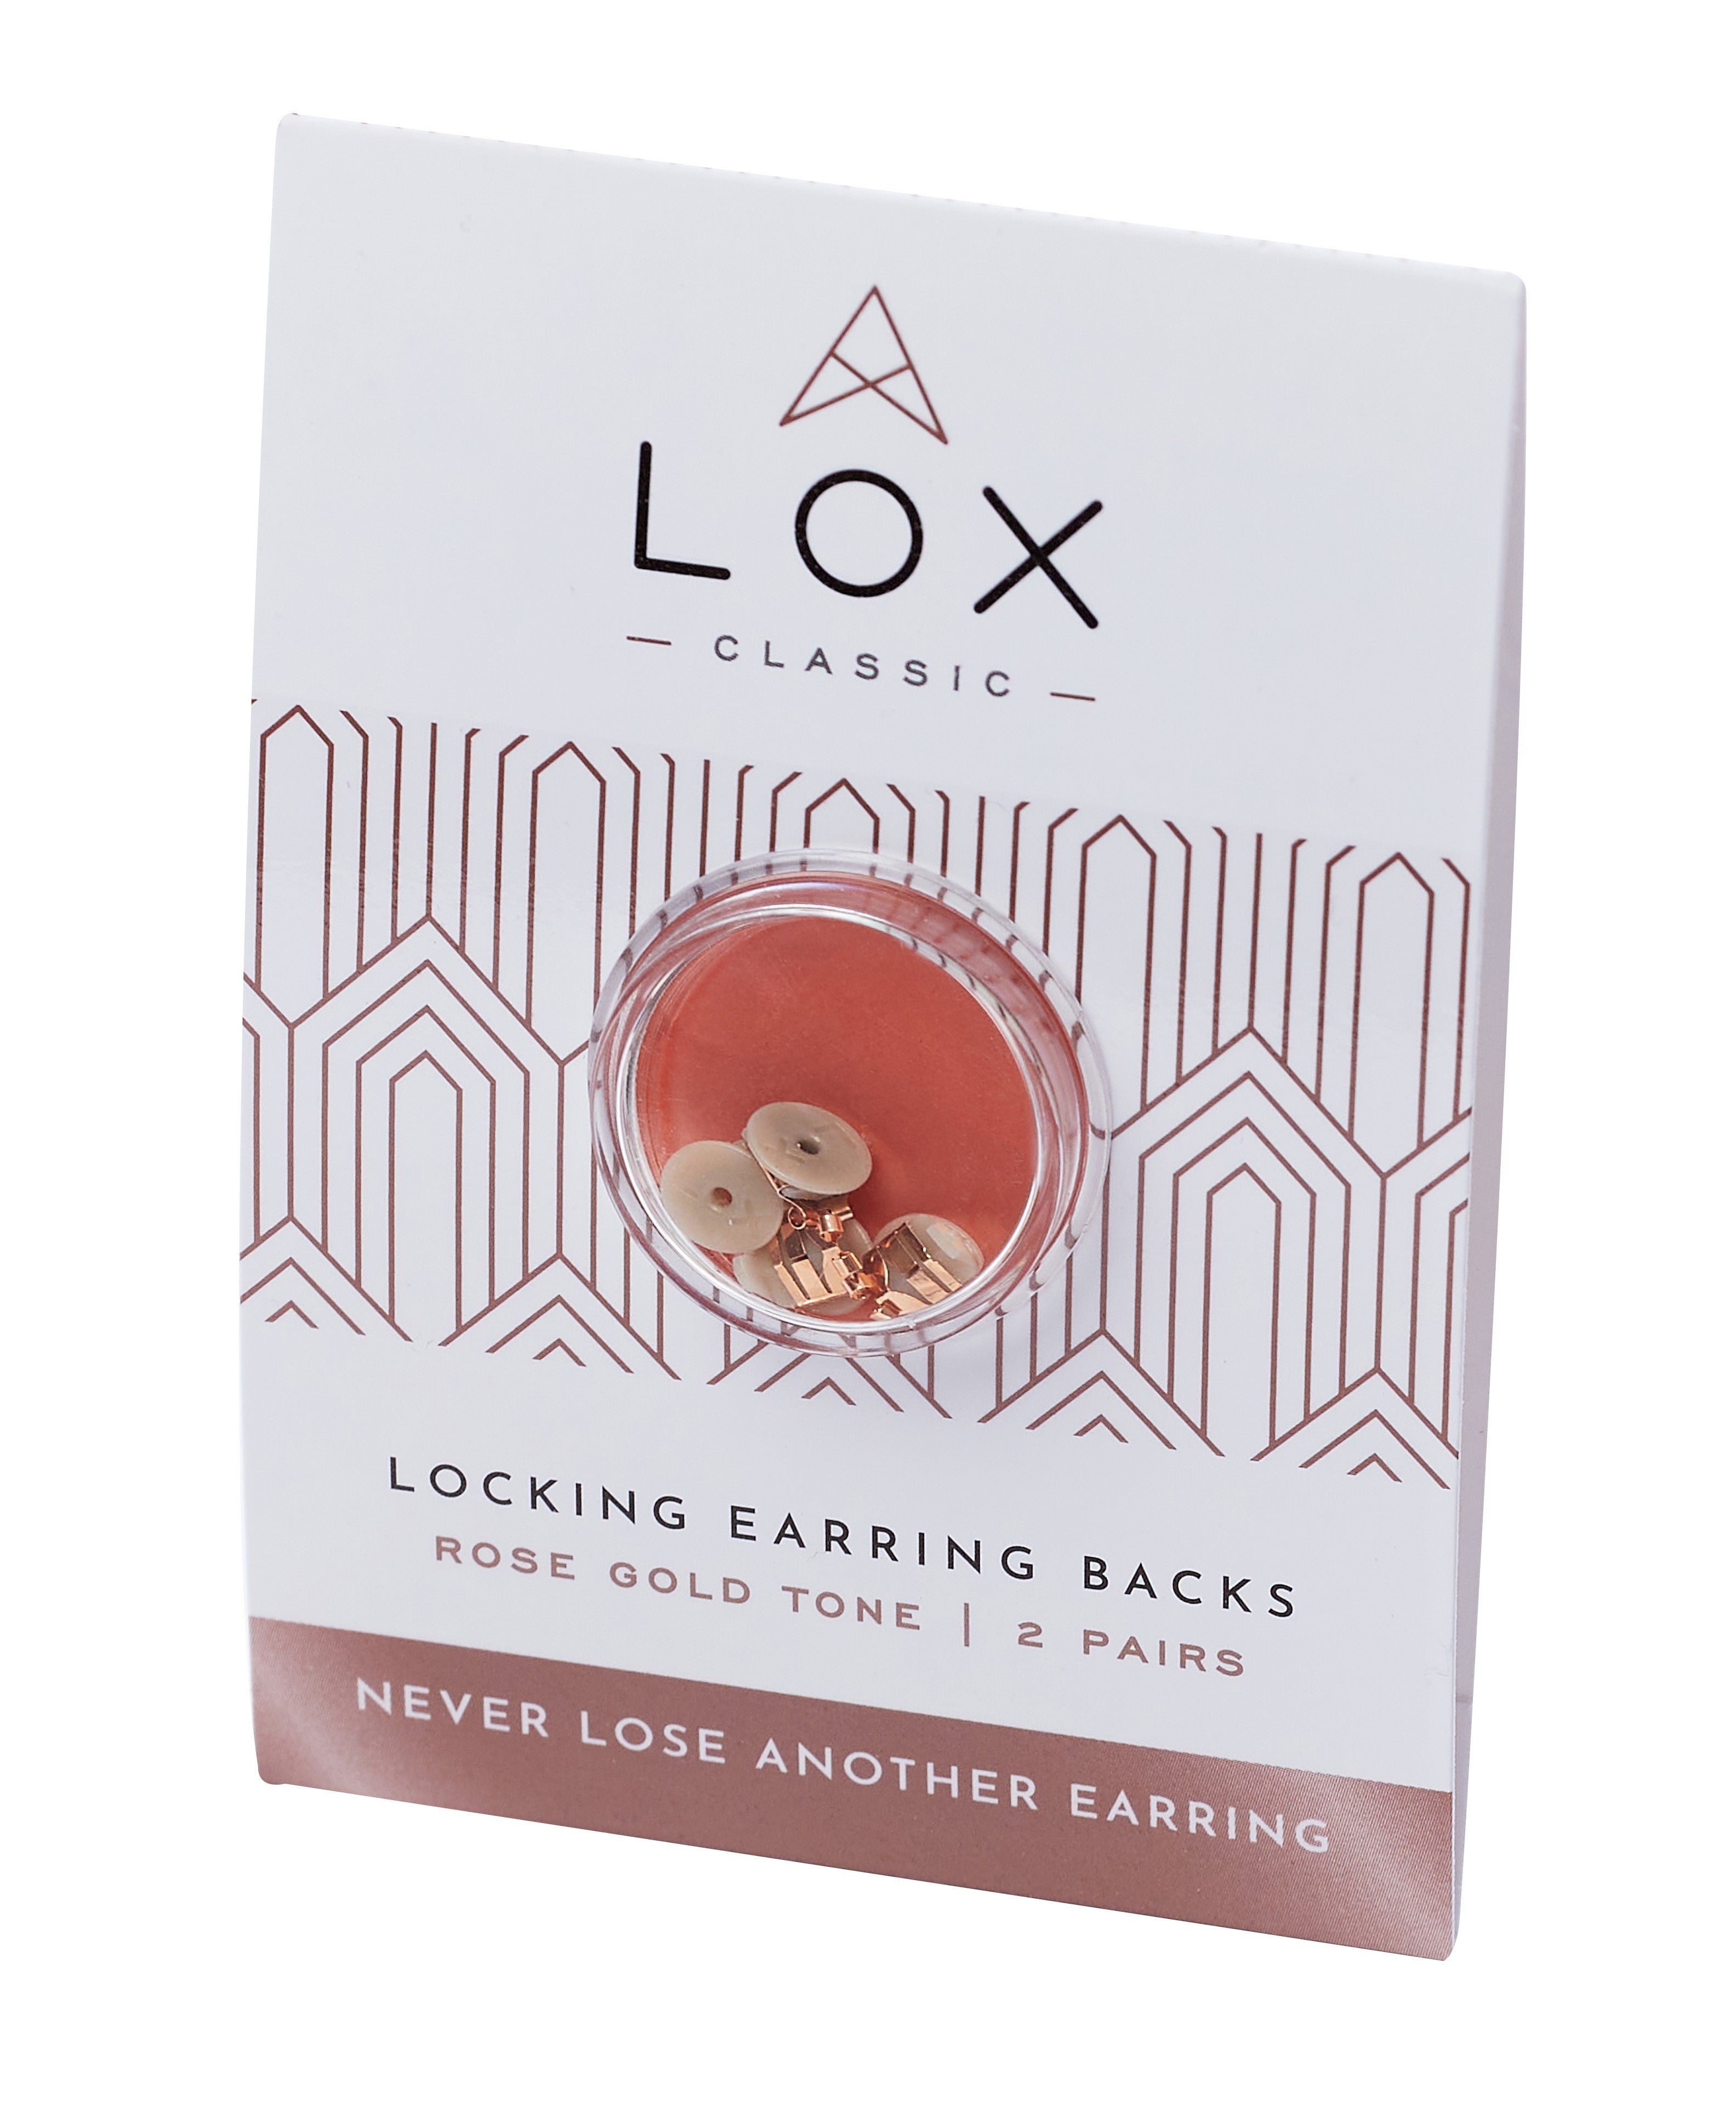 Gold Lox Secure Earring Backs Two Pair Pack 